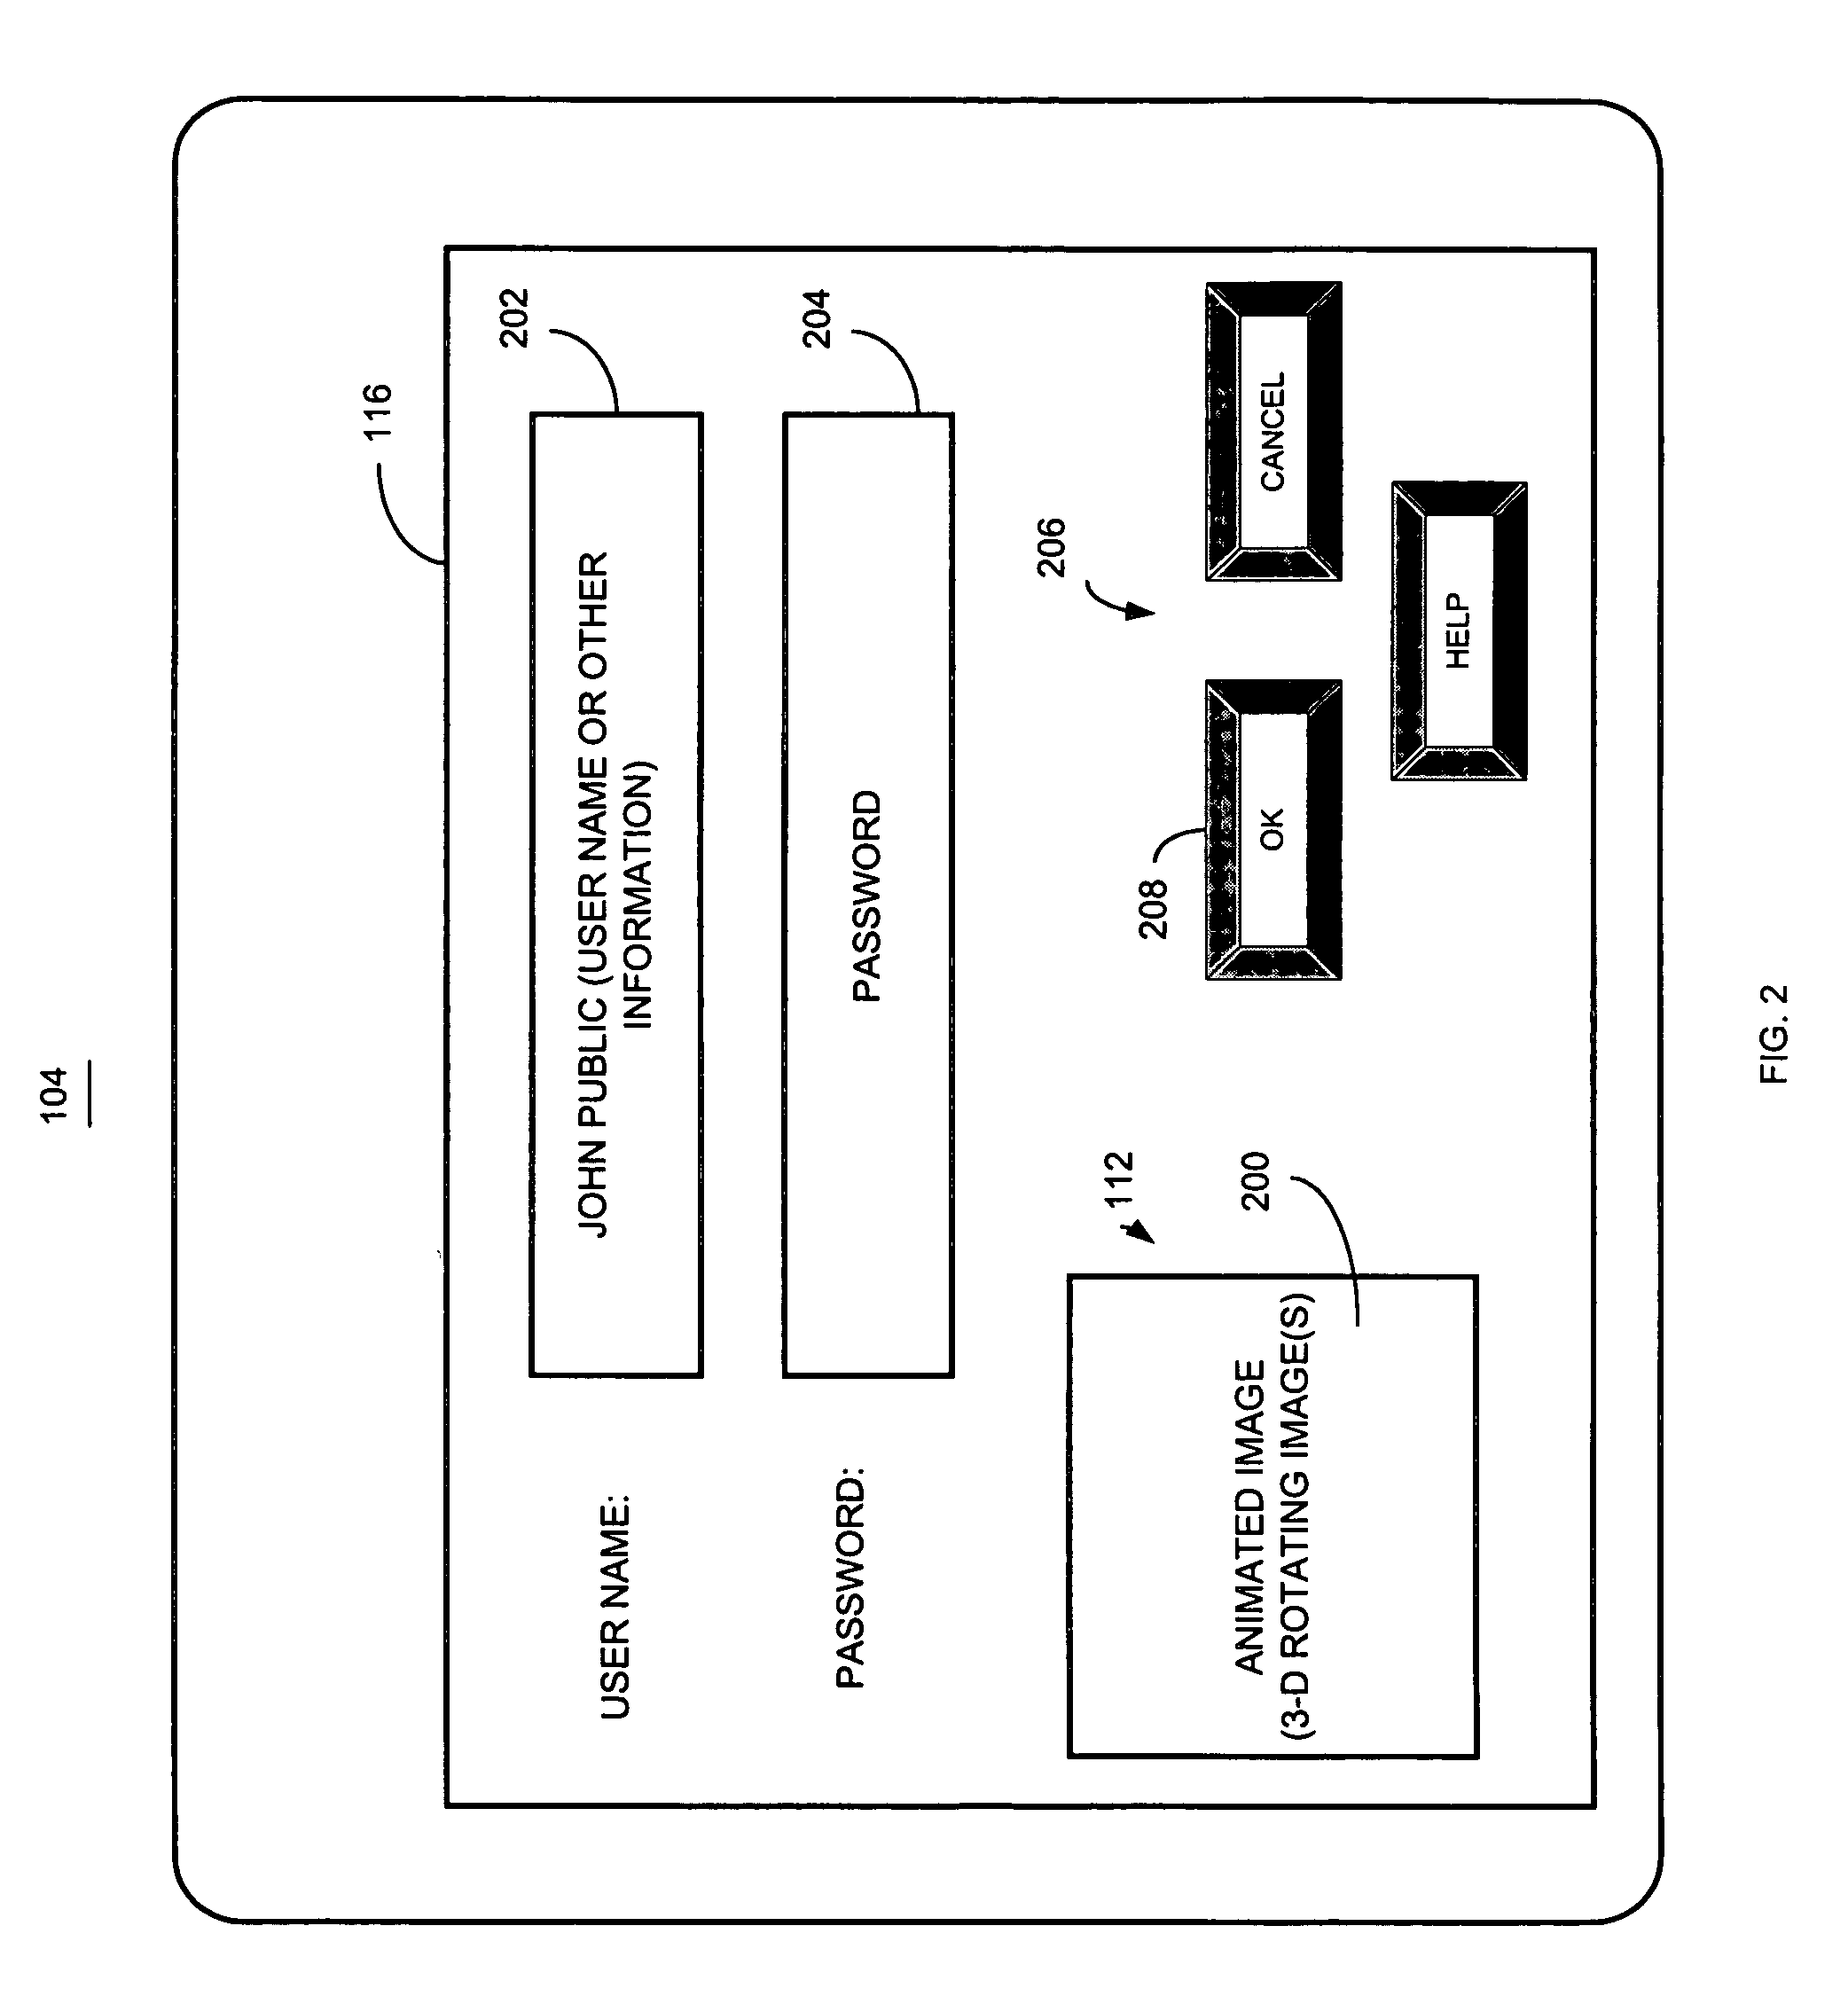 Method and apparatus for password entry using dynamic interface legitimacy information